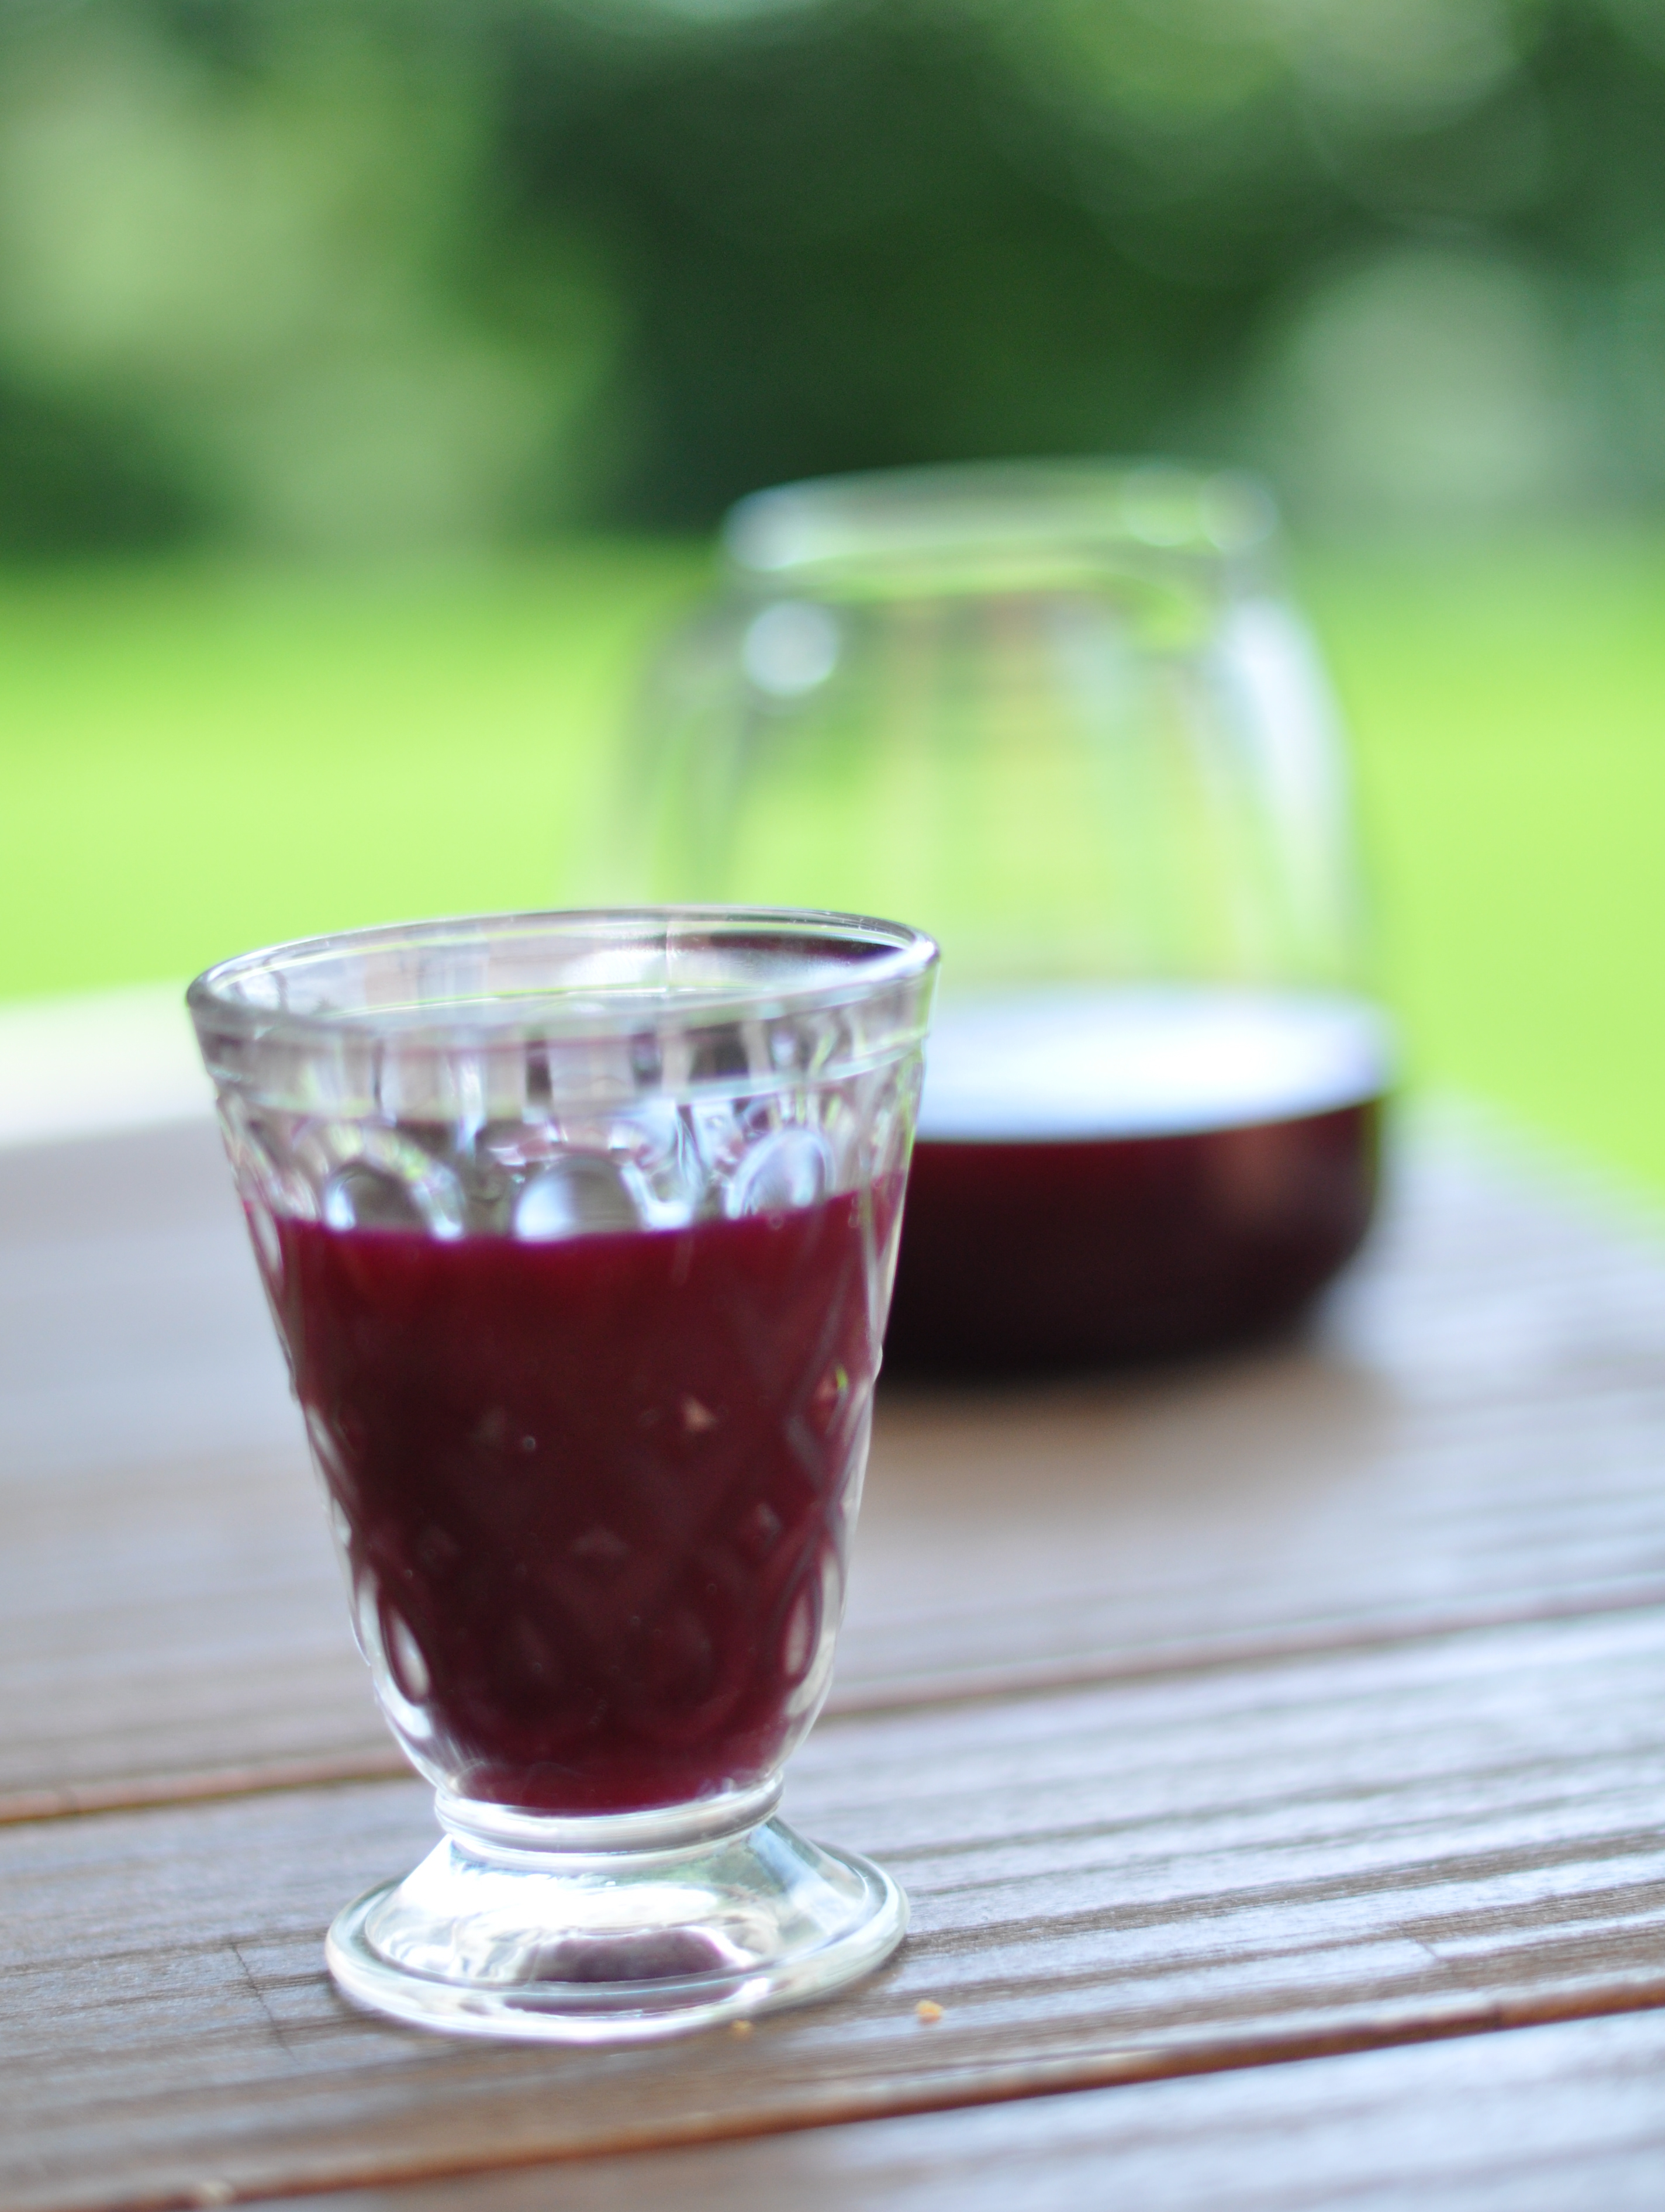 Pickeled beetroot juice (by Joanna)